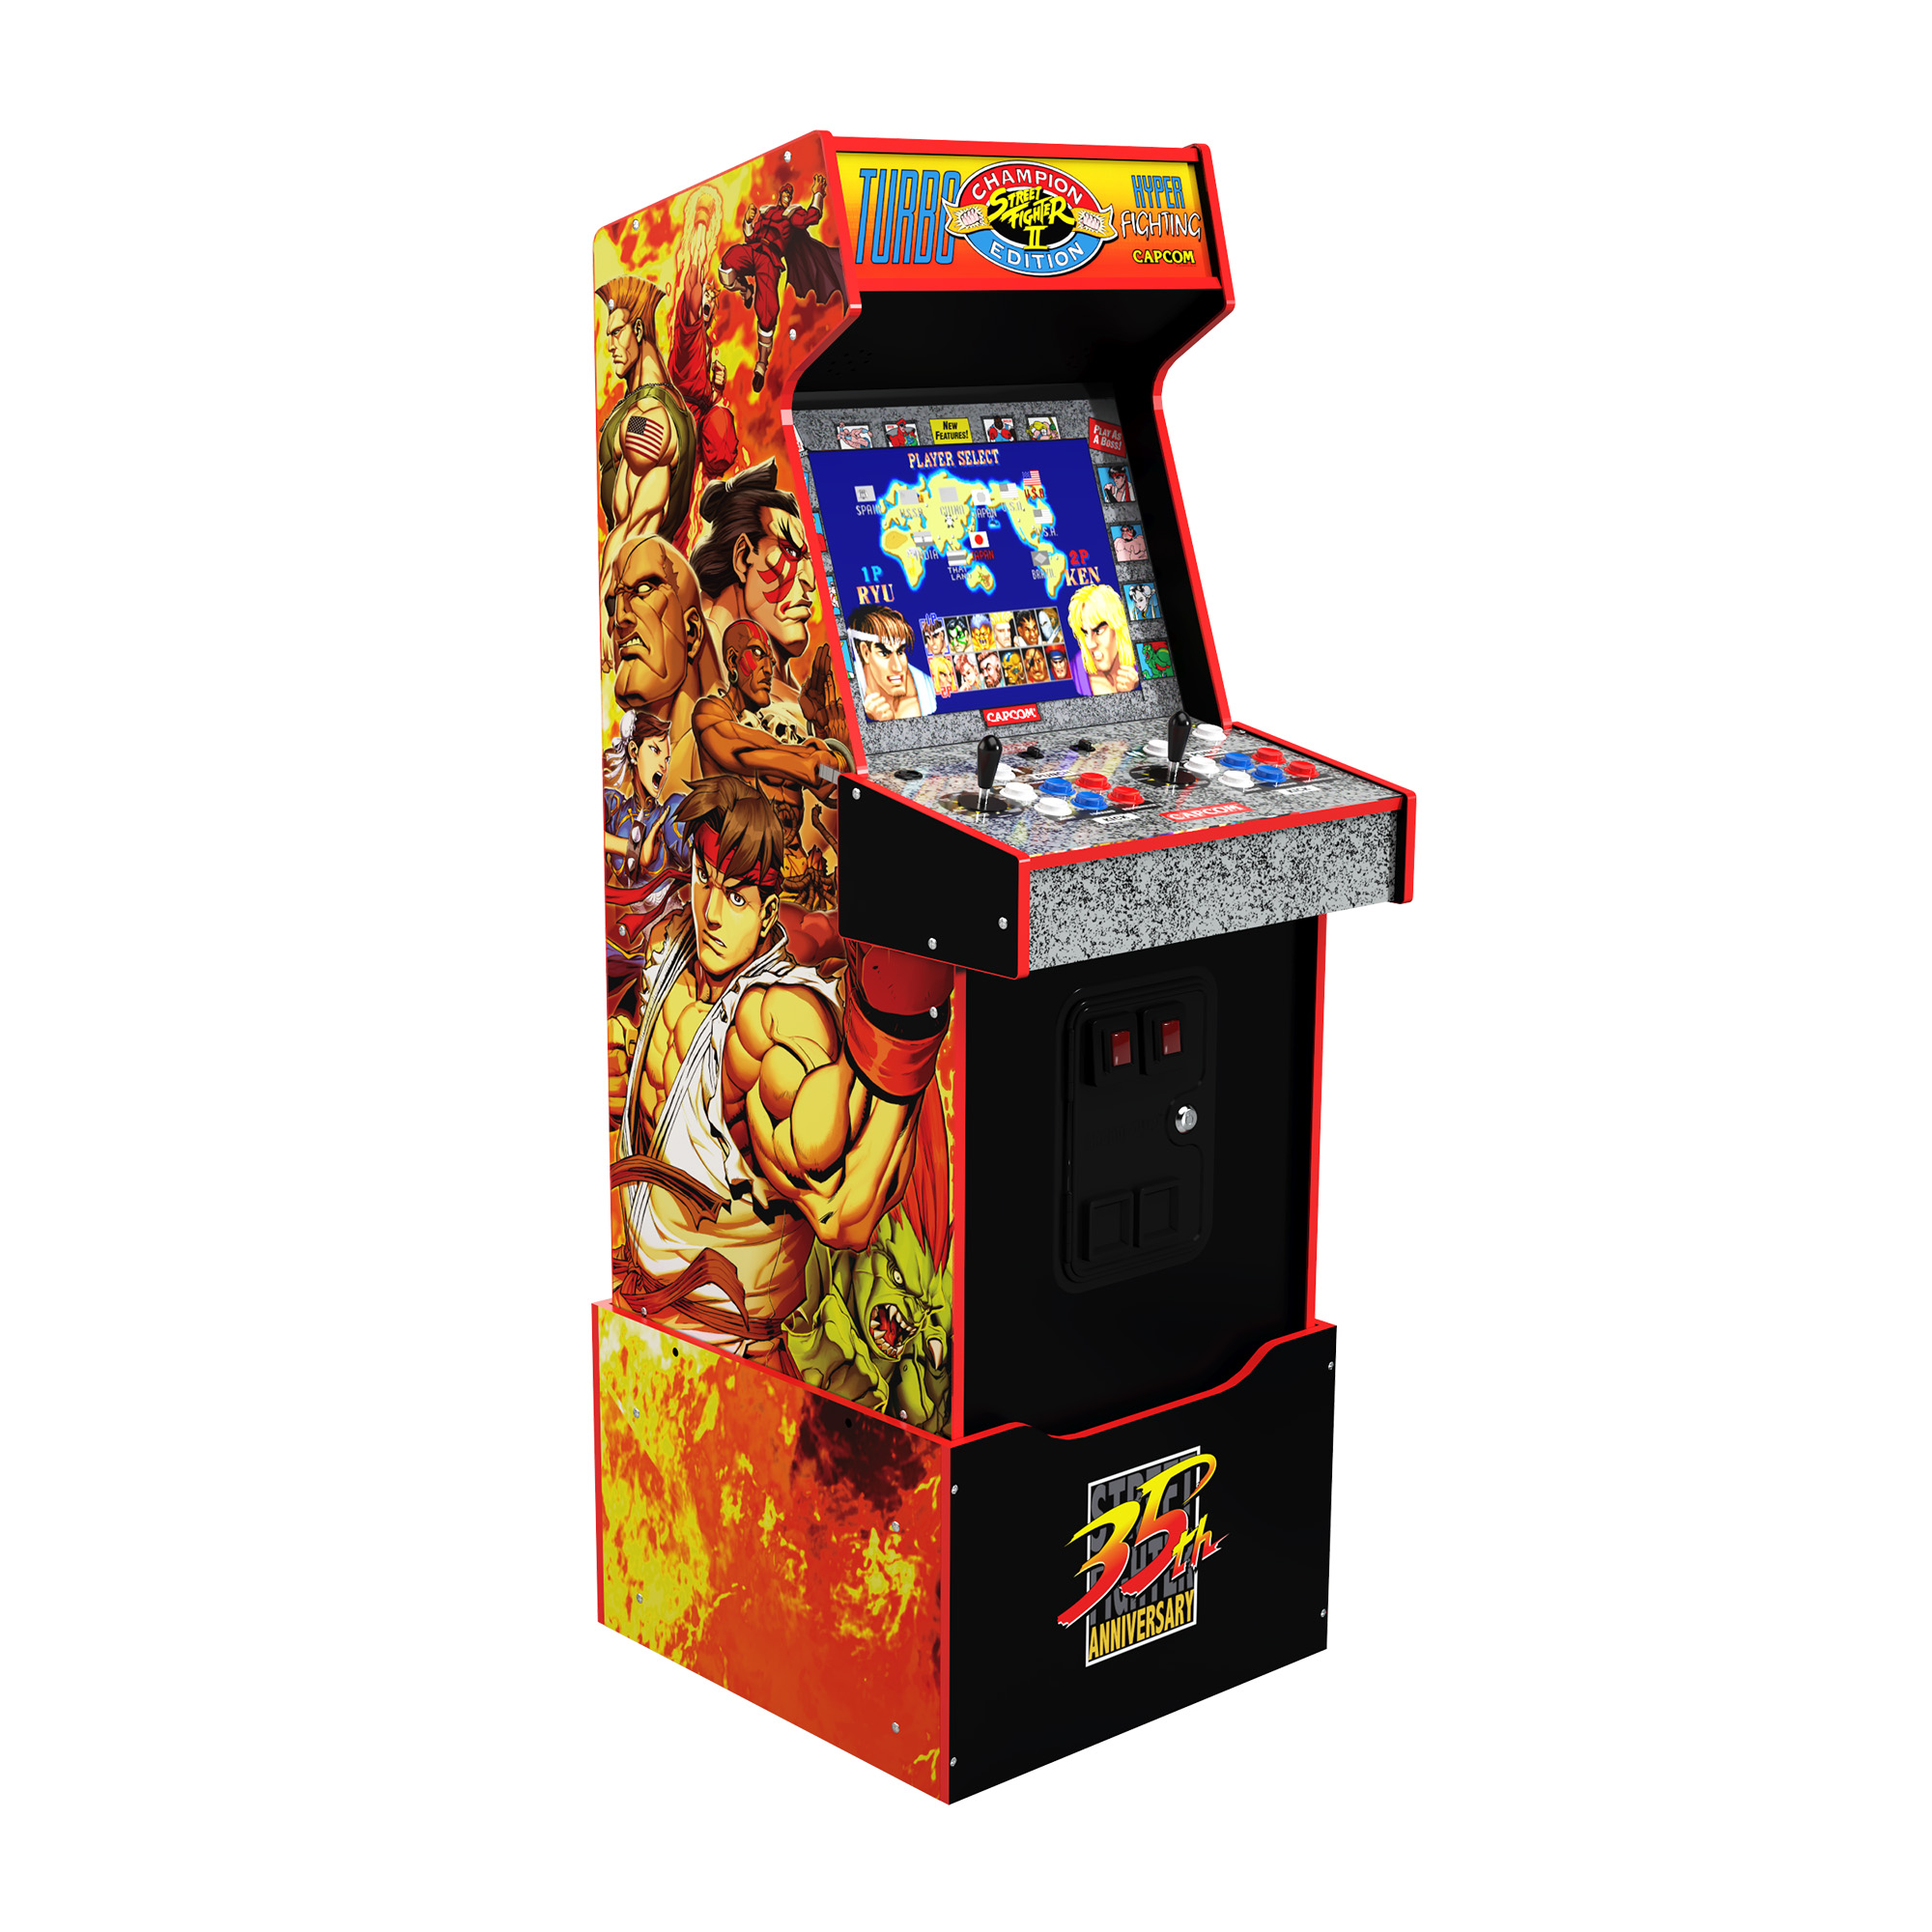 Arcade1UP - 14 Games in 1, Street Fighter II Turbo: Hyper Fighting, Legacy Video Game Arcade with Riser and Wi-Fi Live - image 1 of 7